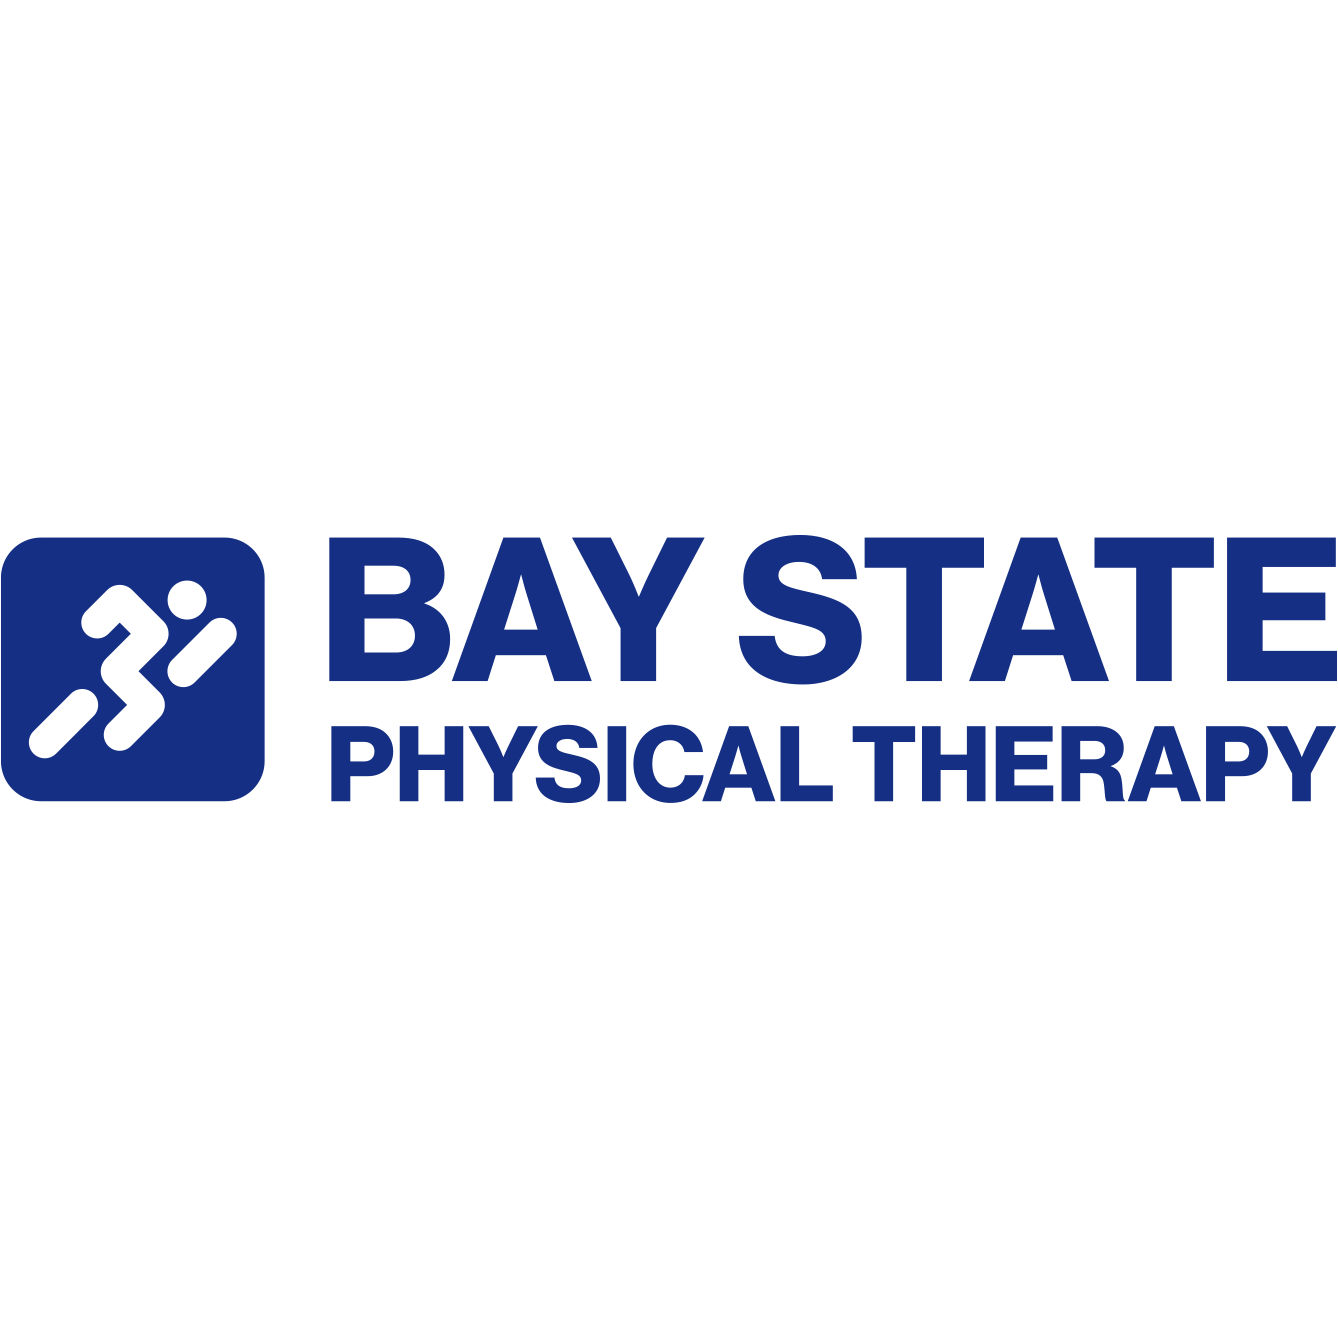 Bay State Physical Therapy - Women's Health and Wellness Center Logo